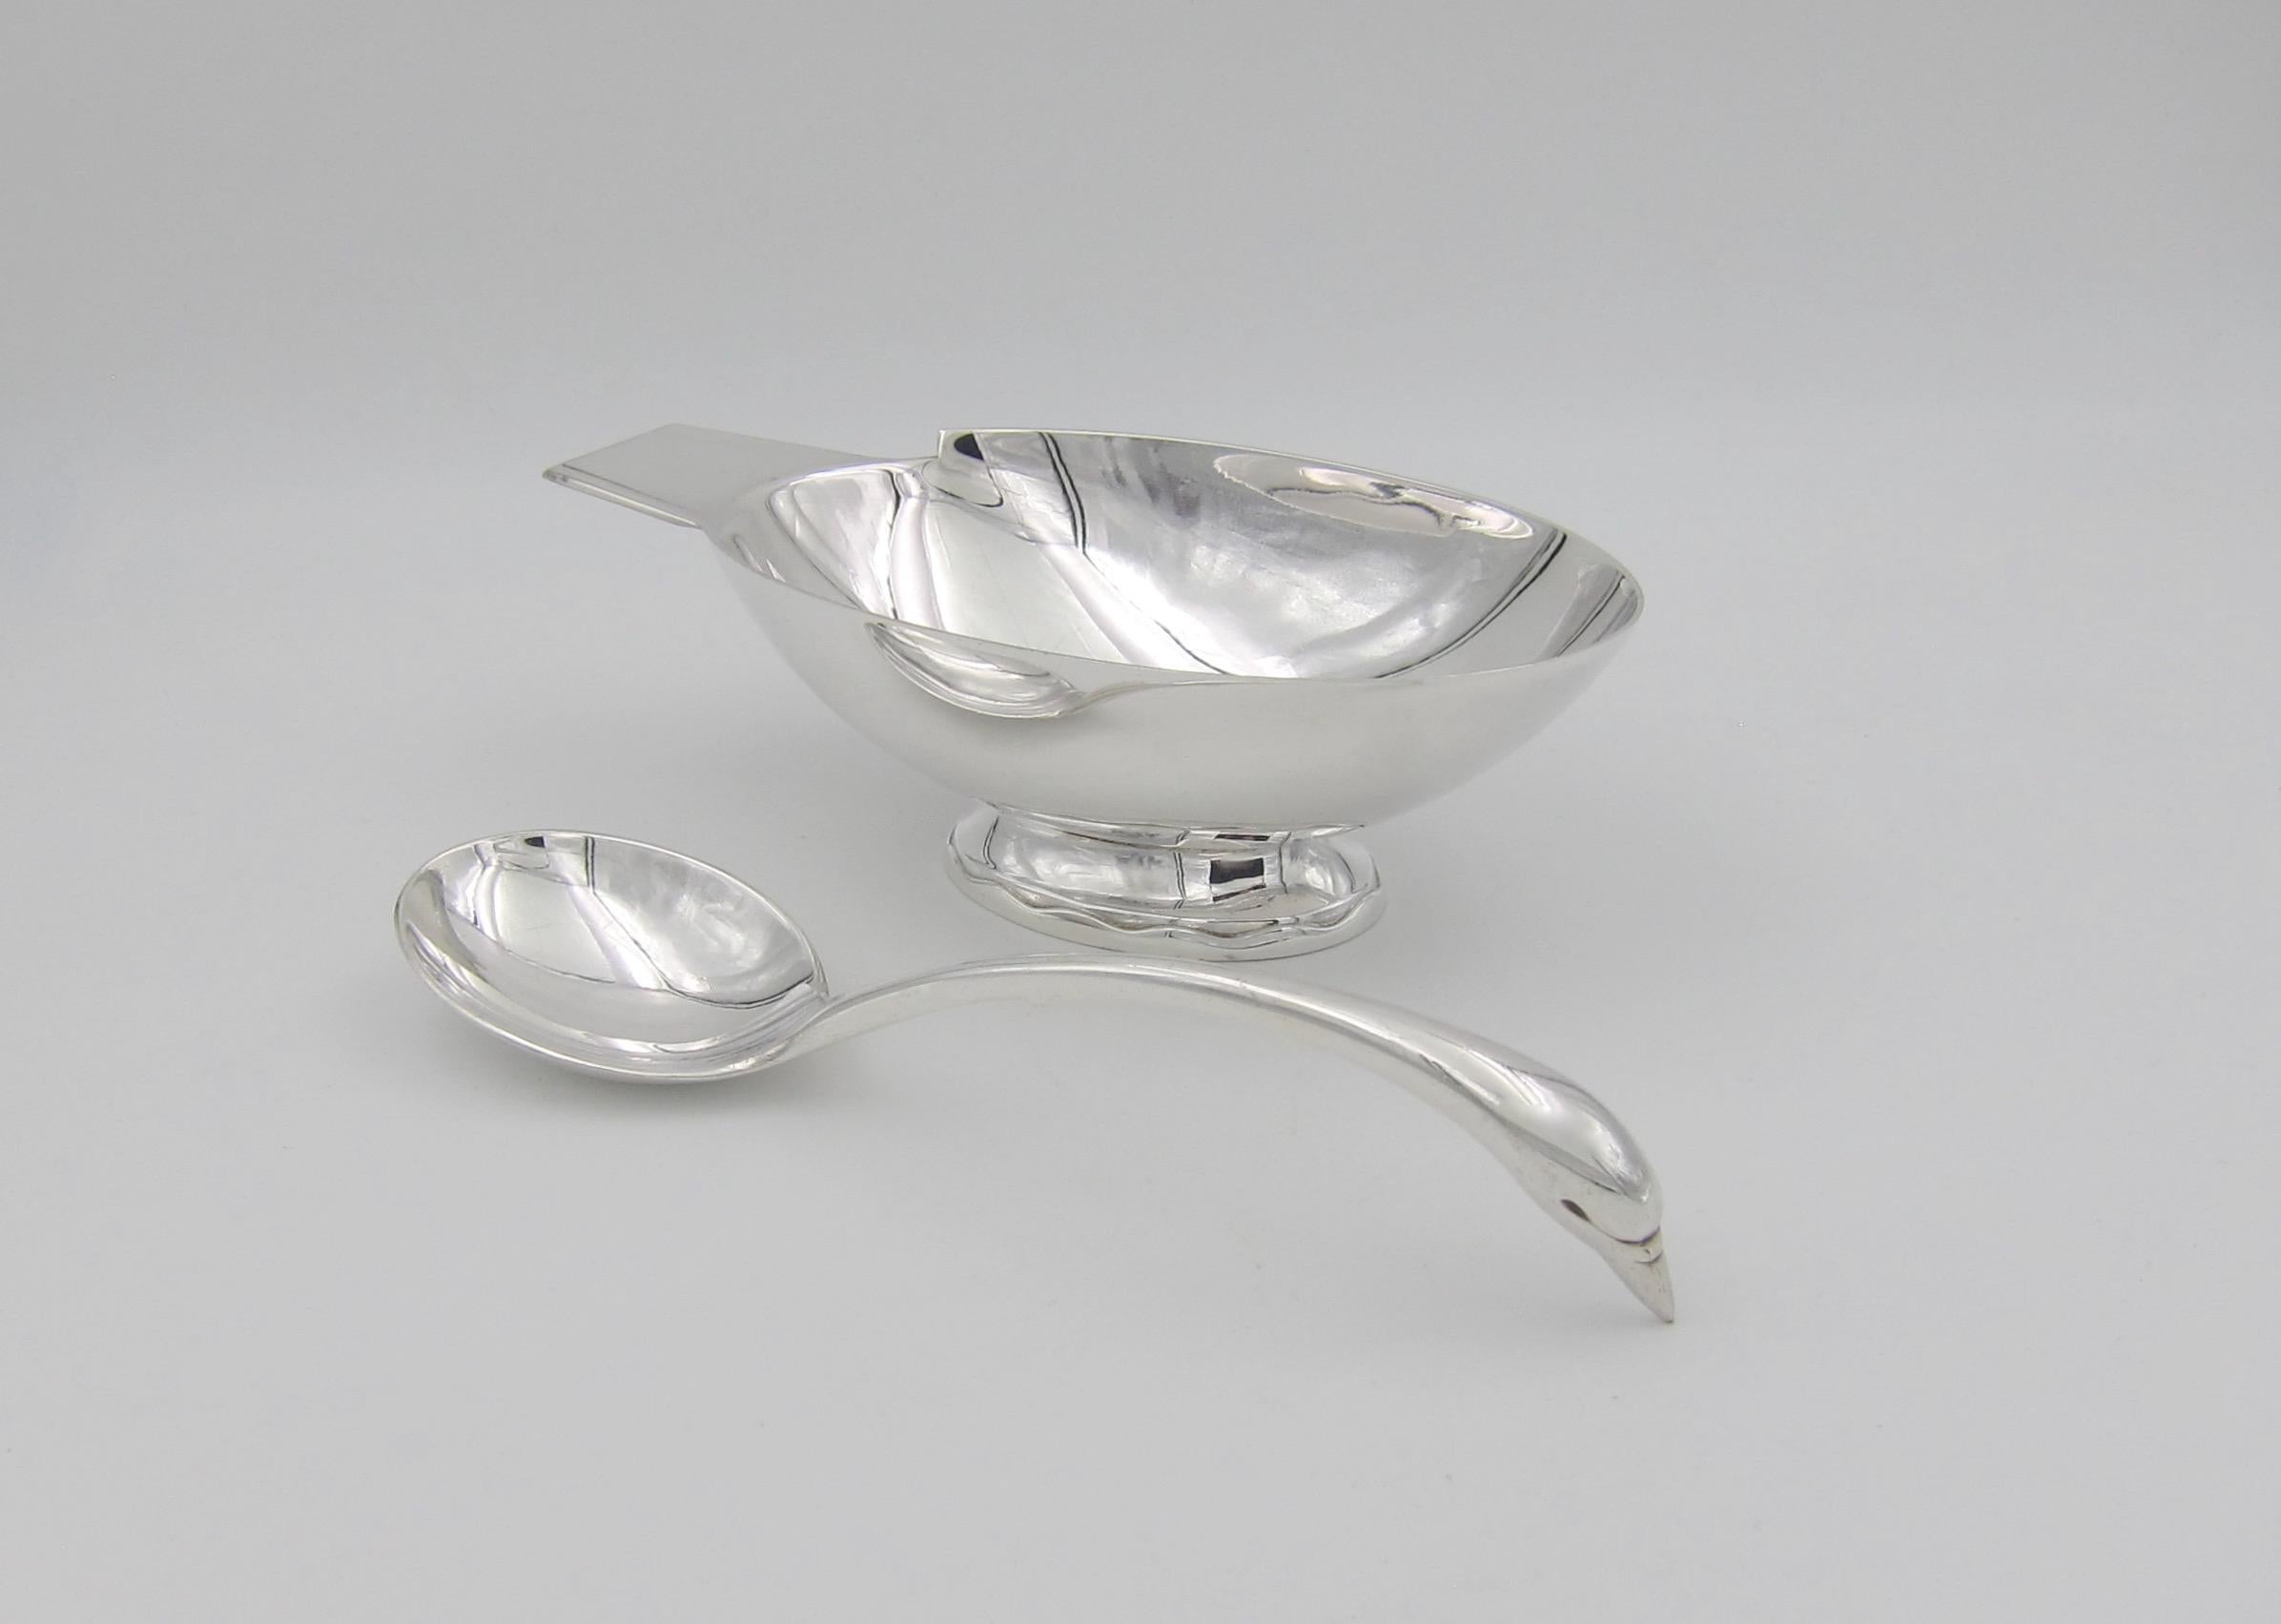 A French Christofle Gallia Art Deco swan saucière and ladle designed by Danish silversmith Christian Fjerdingstad (1891-1968) circa 1930. Fjerdingstad worked as a design consultant for Christofle from 1924-1939 and his elegant silver plated swan